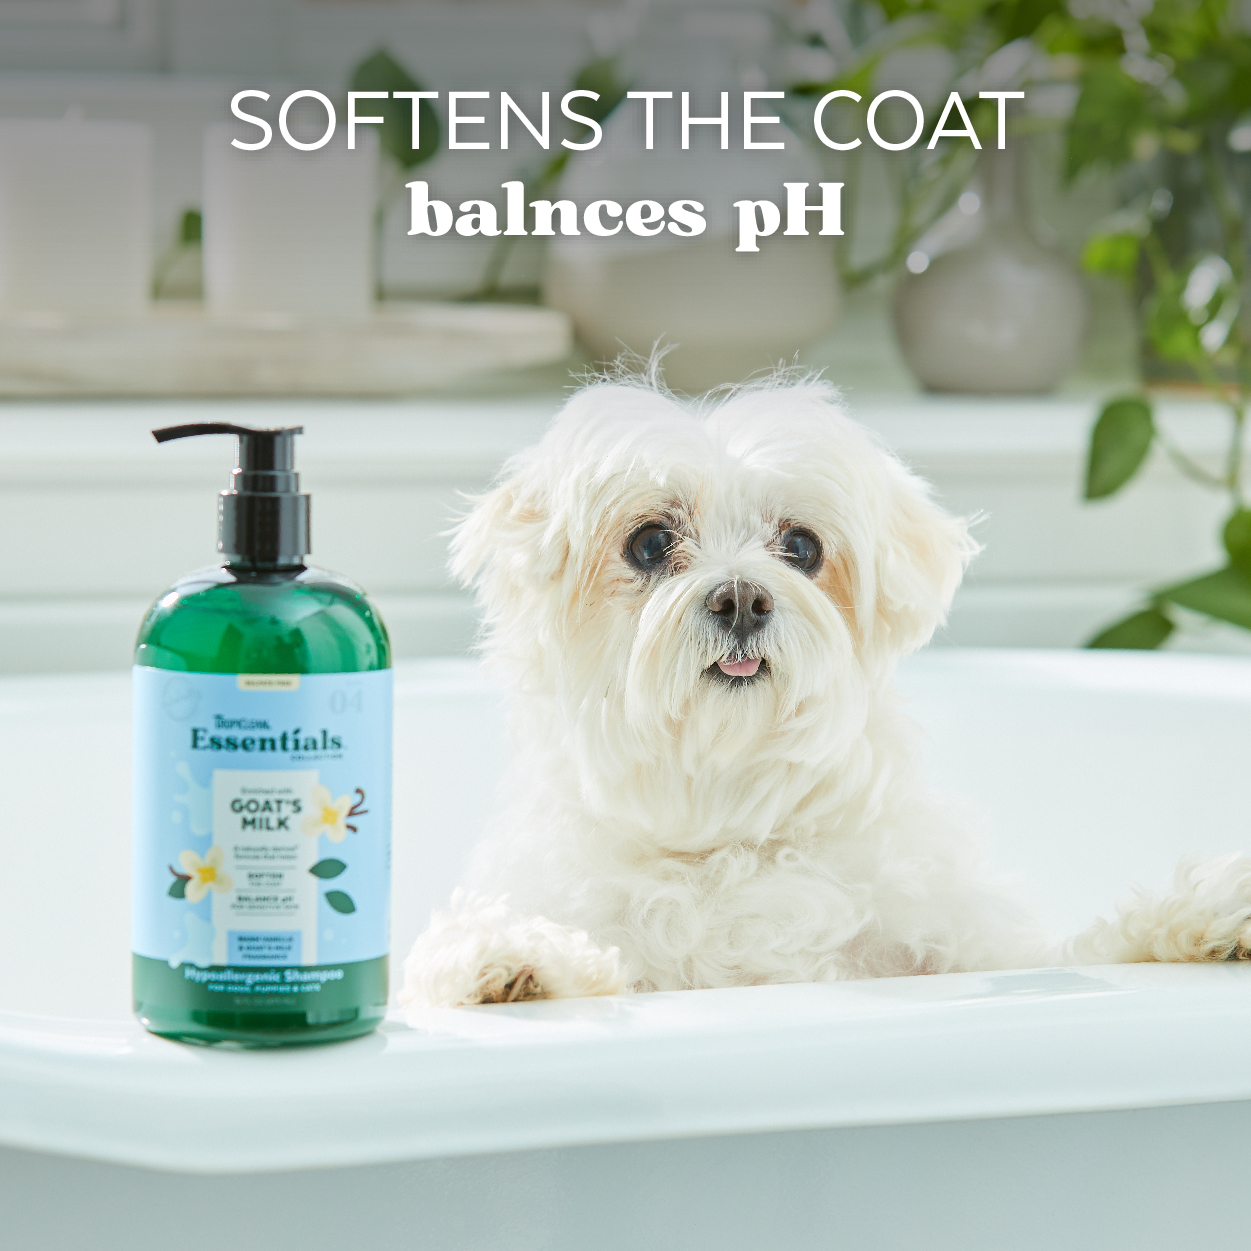 Goat’s Milk Hypoallergenic Shampoo for Dogs, Puppies and Cats